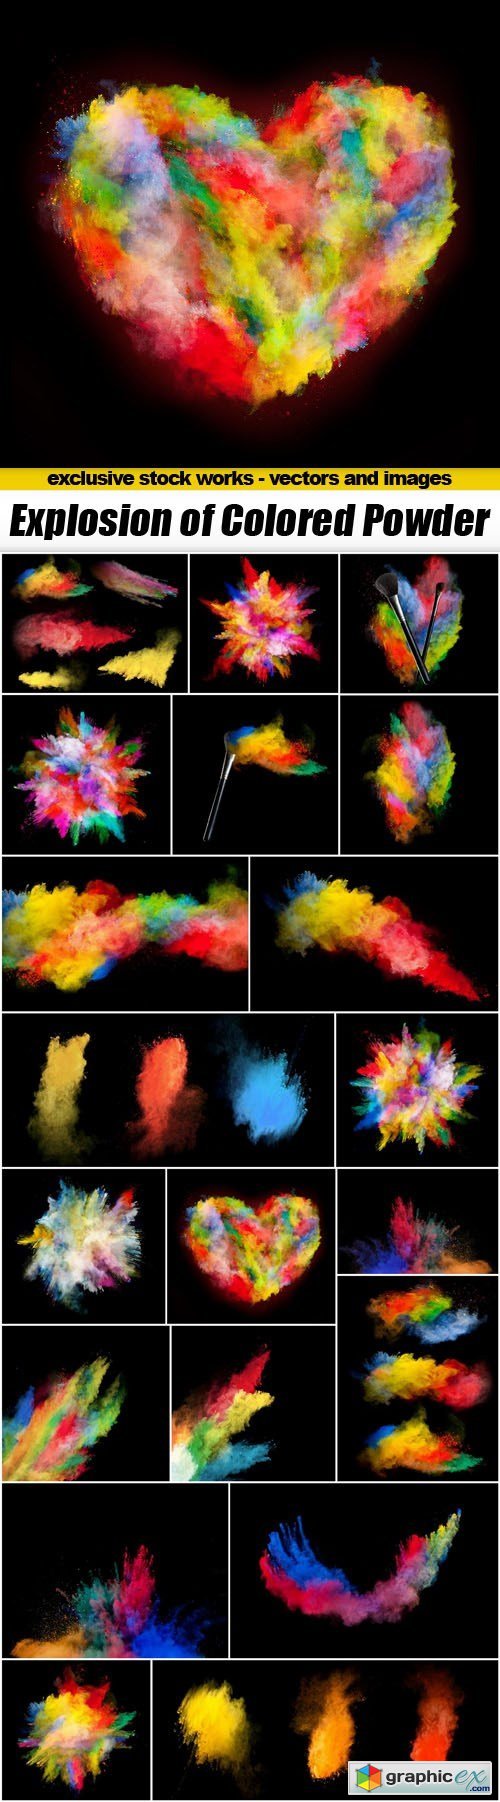 Explosion of Colored Powder - 20xUHQ JPEG